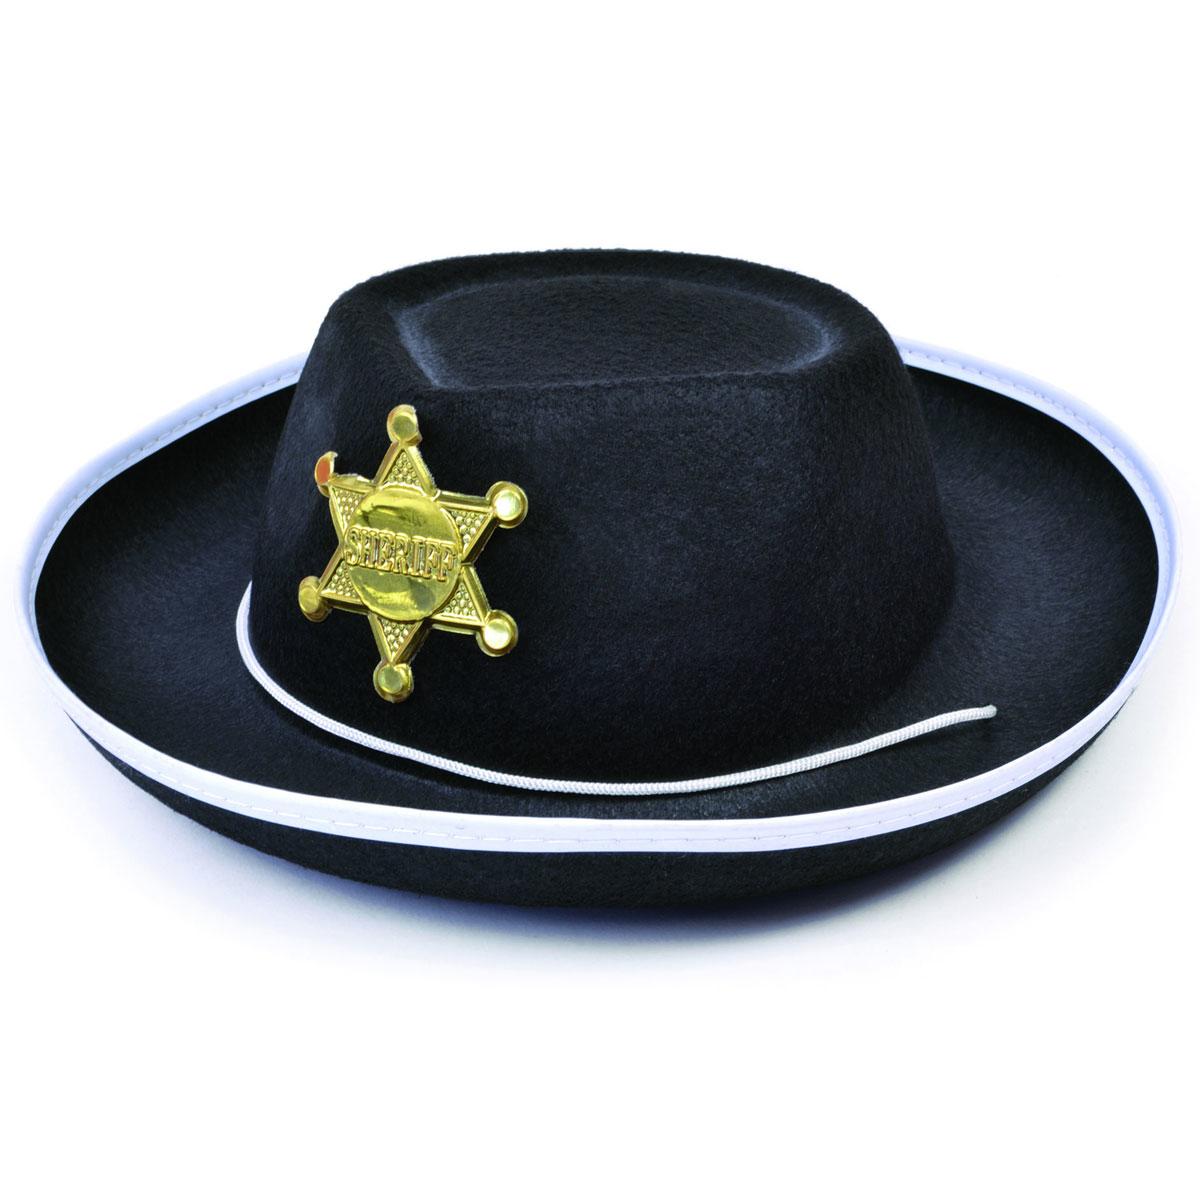 Children's Cowboy Hat in black felt with white trim and gold Sheriff badge BH206 available here at Karnival Costumes online party shop